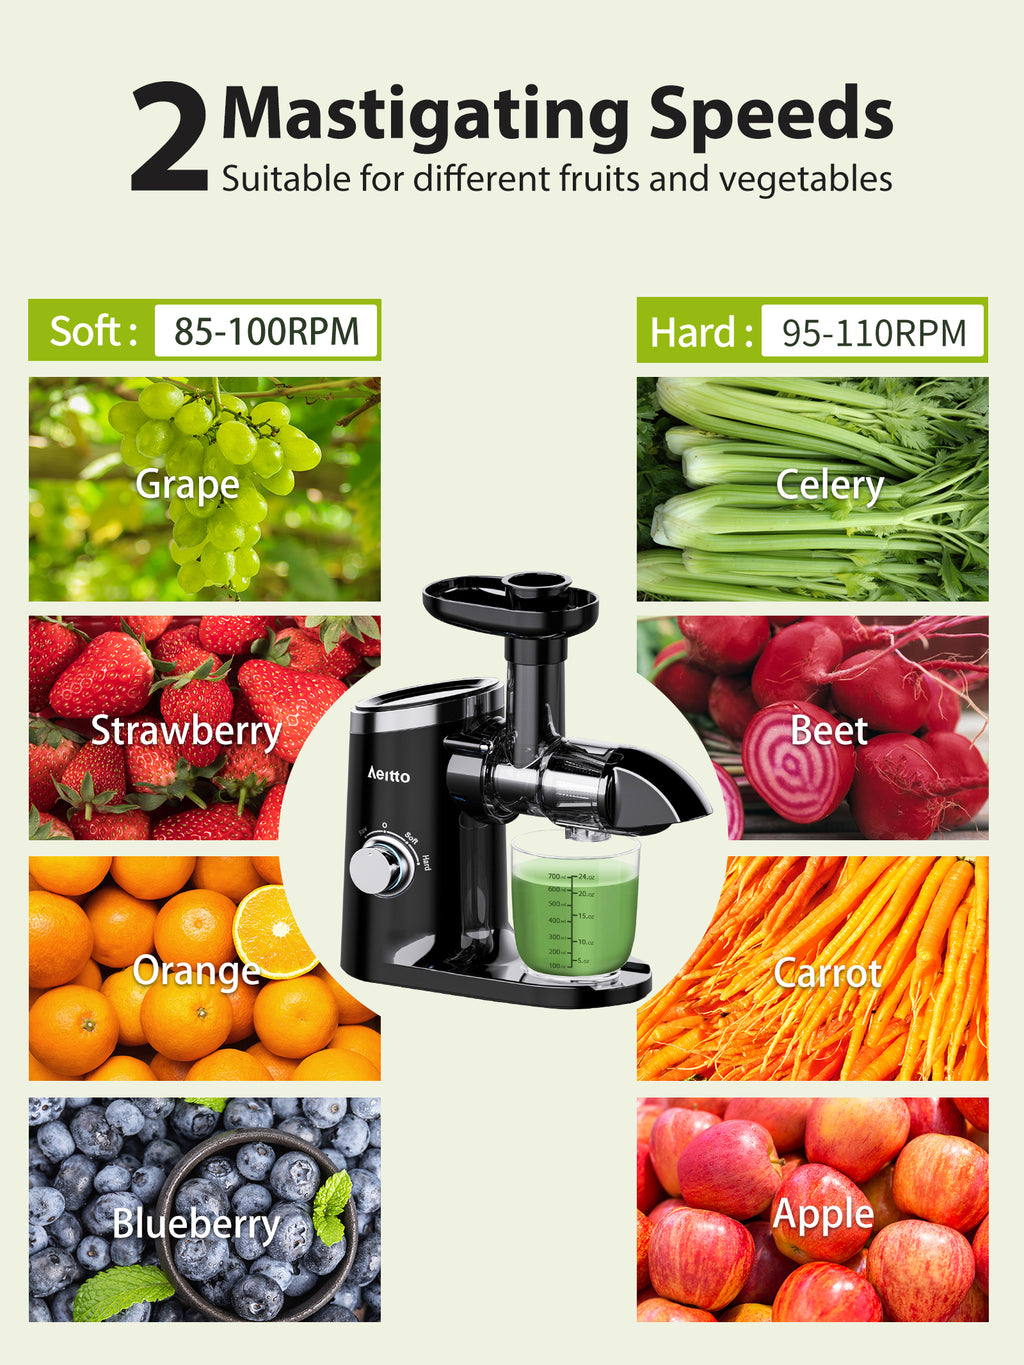 Aeitto Slow Masticating Cold Press Juicer Machine Extractor With Reverse  Function & Double Safe System - Includes 3.2” Wide Chute - Hsj-8824 : Target